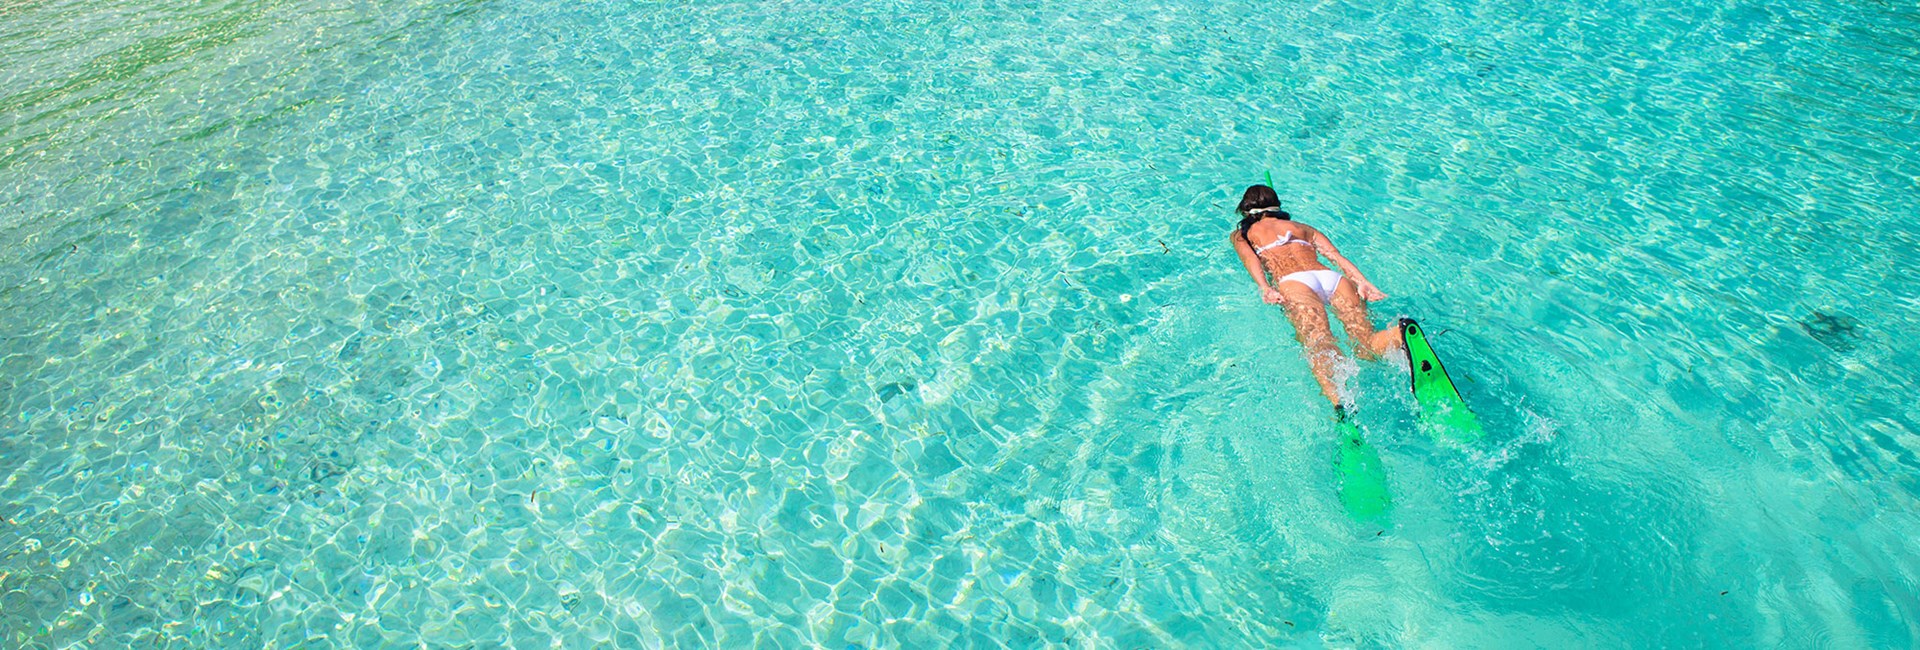 Girl snorkelling in a clear, turquoise tropical sea